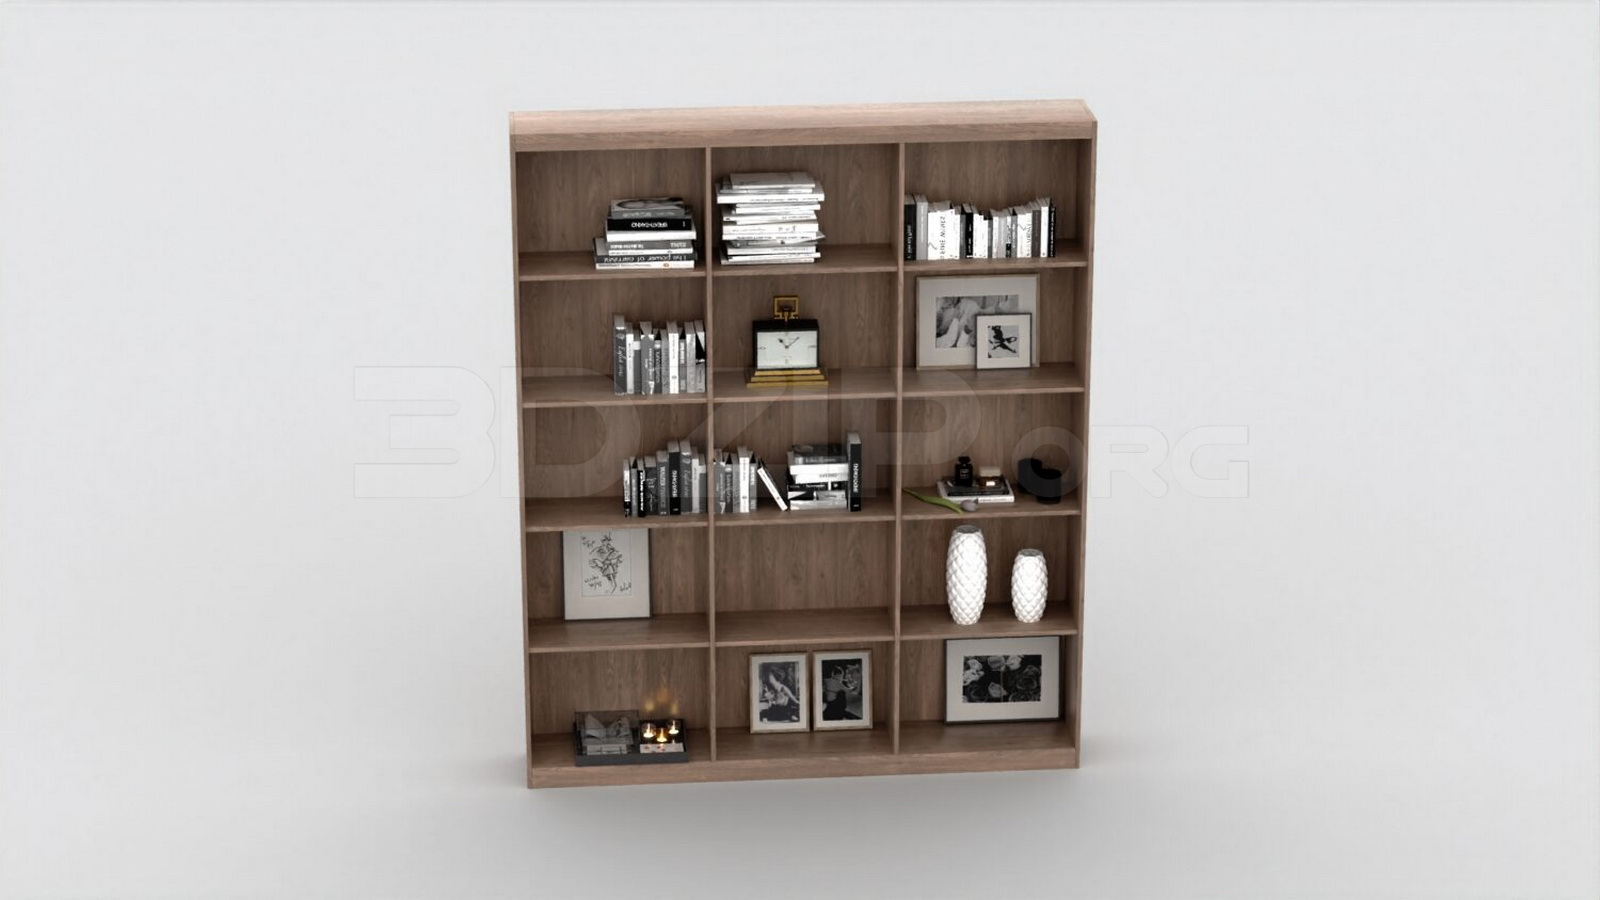 808. Download Free Bookcase Model By Huy Hieu Lee